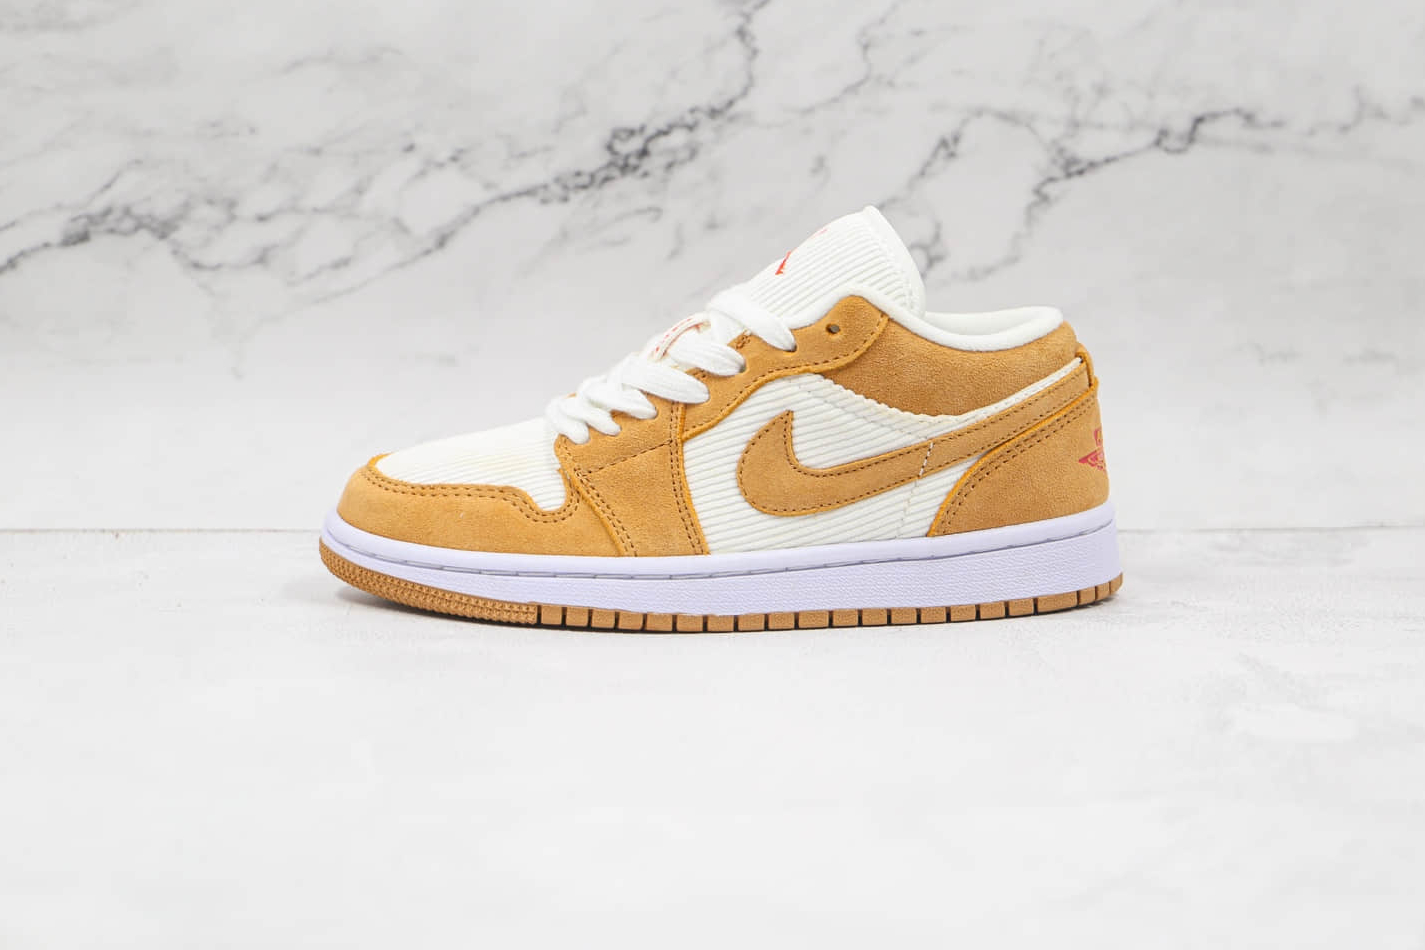 Air Jordan 1 Low SE 'Twine' DH7820-700 | Stylish and comfortable sneakers with a unique design